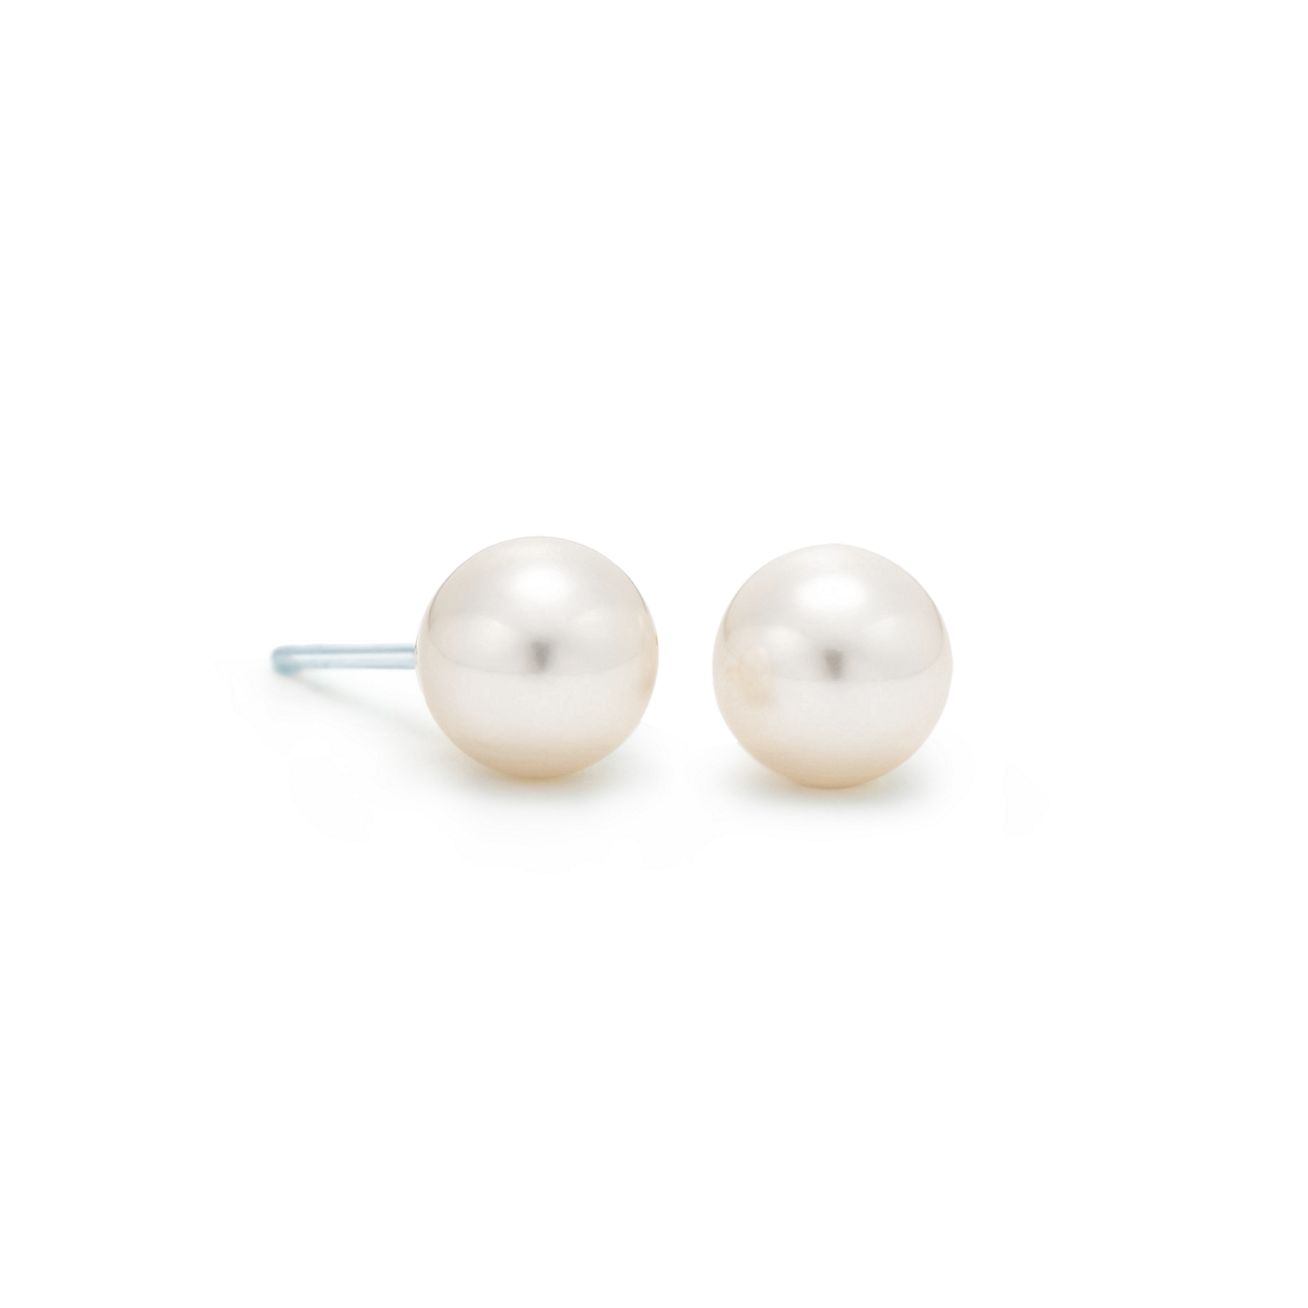 CLassic AAA 4-5MM white Nature Round Akoya Pearl earring 14K solid gold 